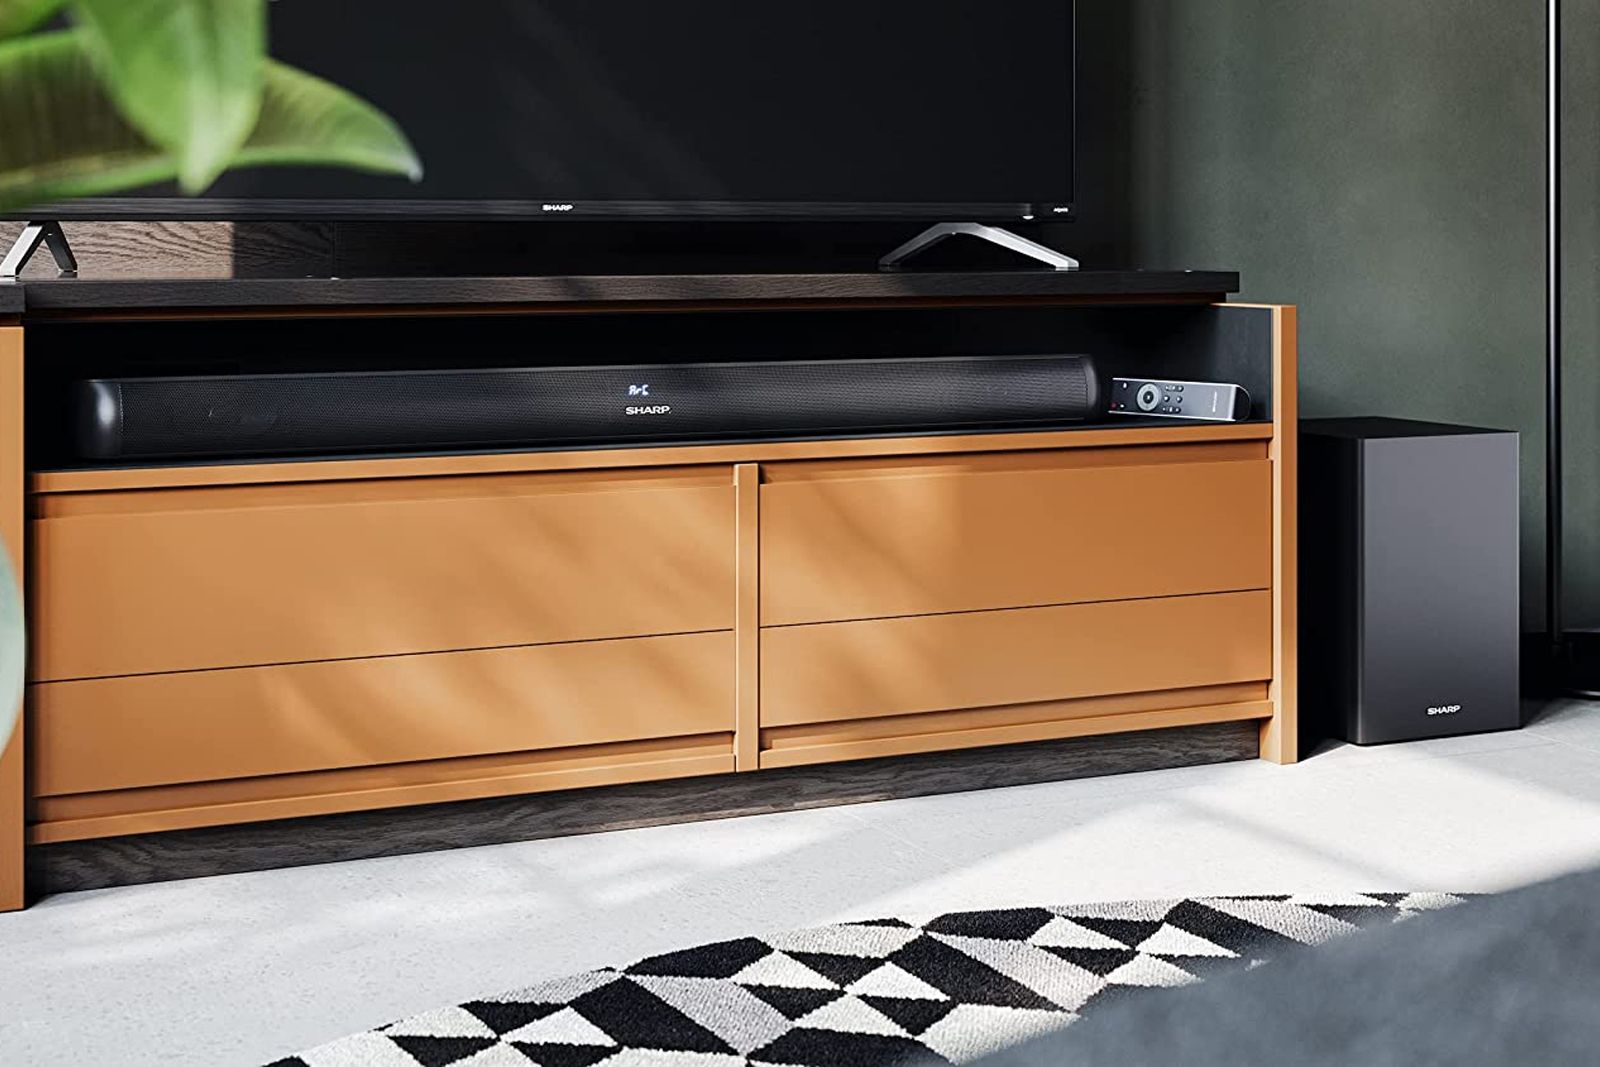 Sharp's 2.1 Soundbar with wireless Subwoofer offers the ultimate TV audio combo photo 1